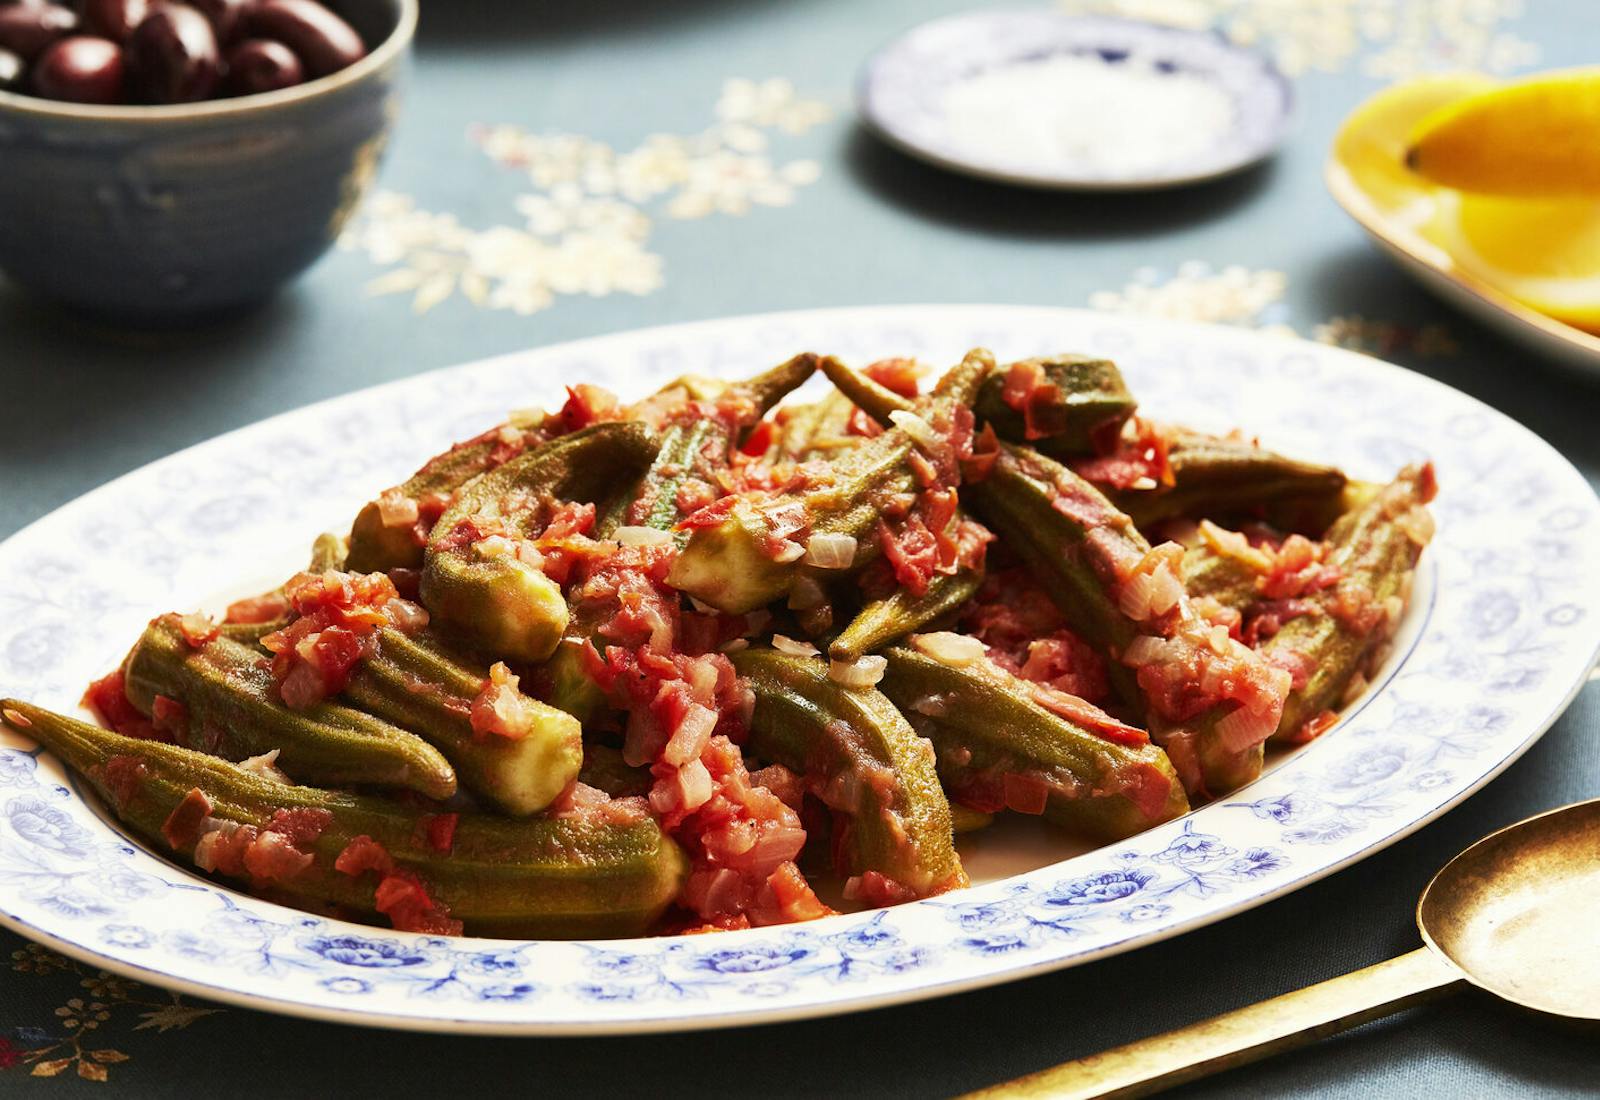 Okra with tomatoes, lemon wedges and olives atop navy tablecloth.